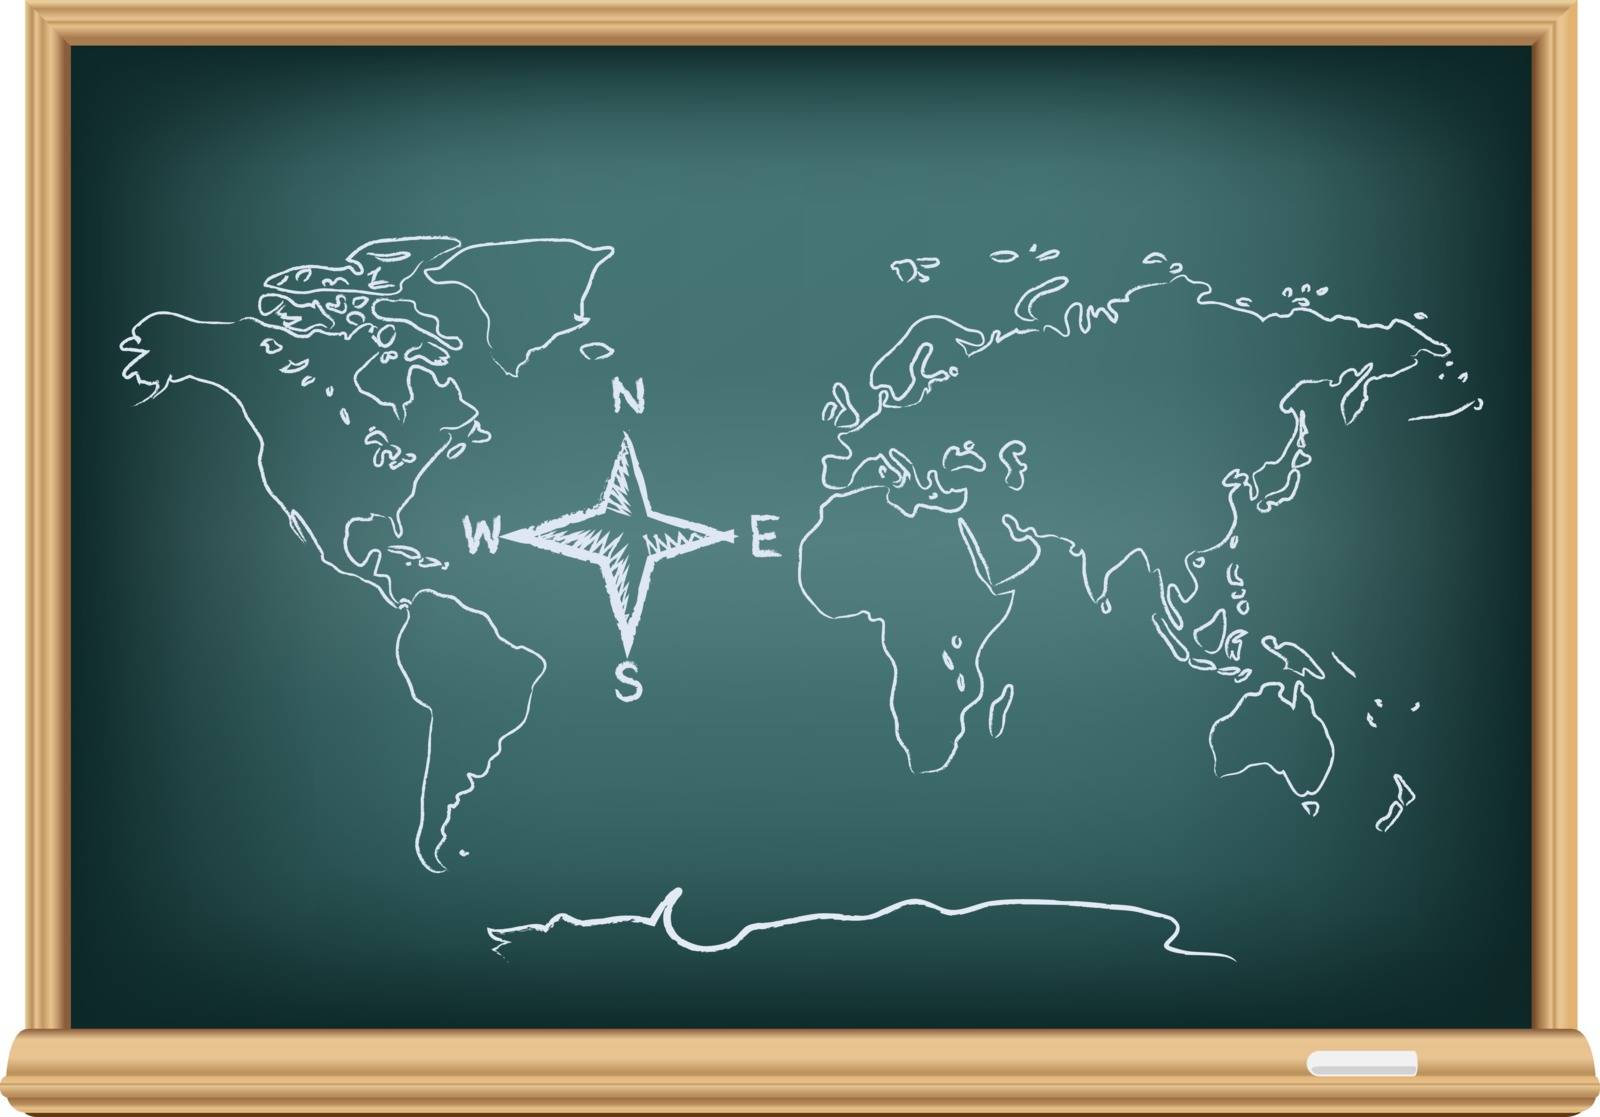 Studying geography map. Drawing world and compass wind rose on education blackboard on a white background. The arrows directions shows North South East West